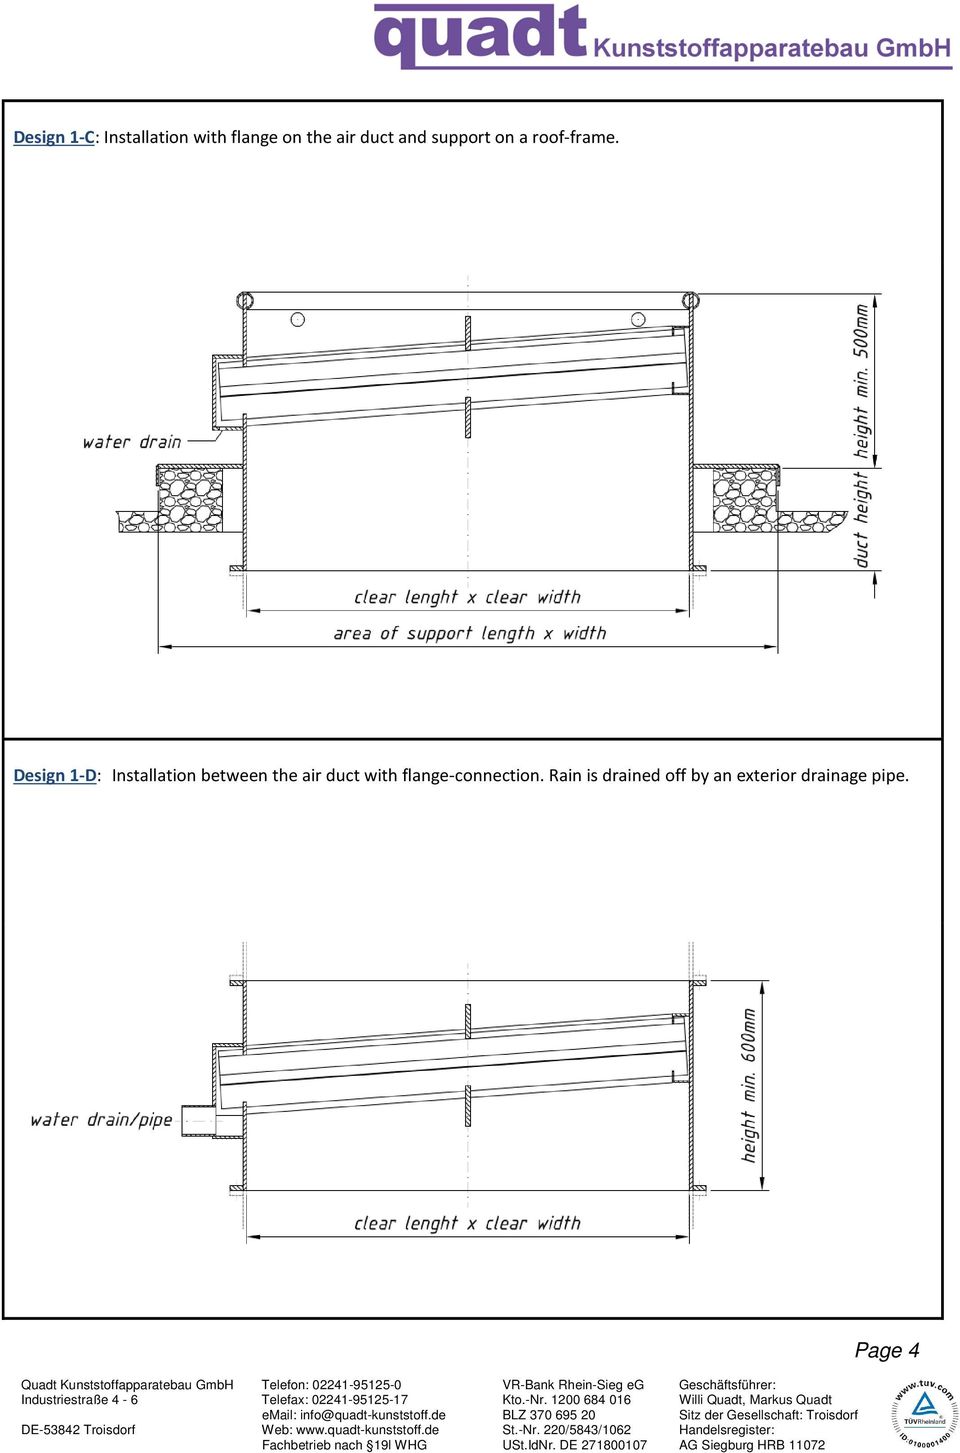 Design 1-D: Installation between the air duct with